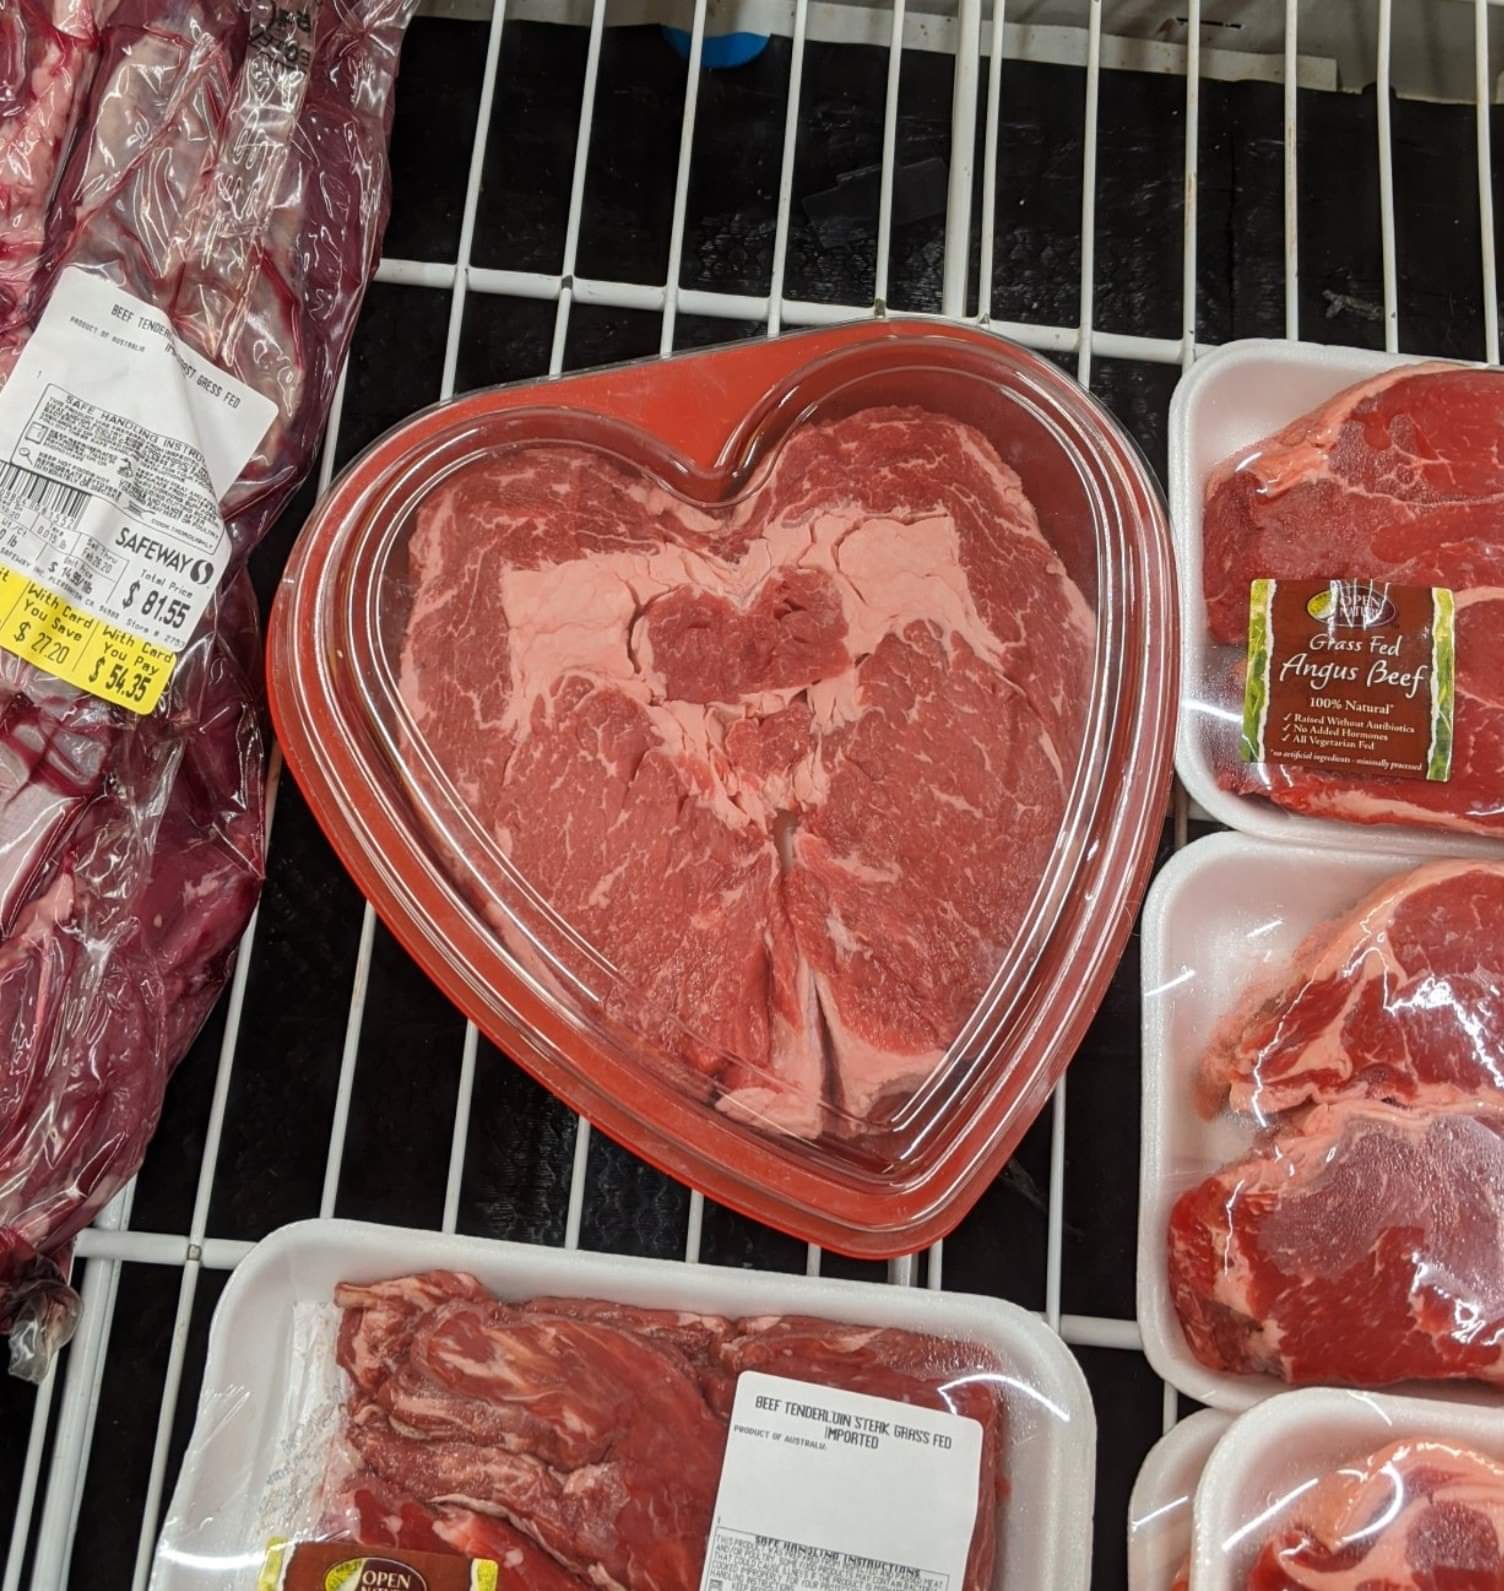 Don't forget to season your meat this Happy Valentine's!